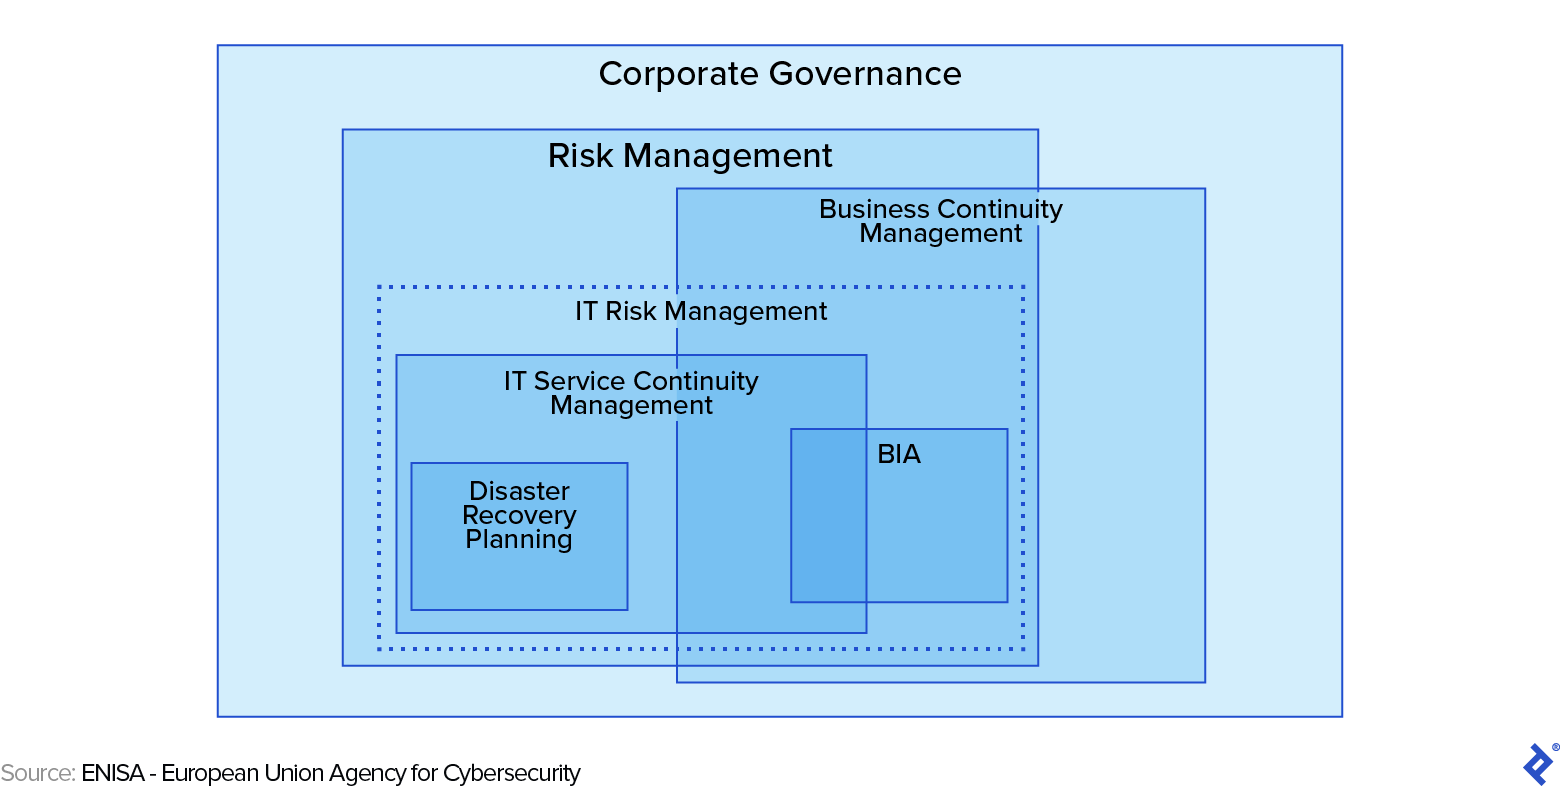 Business Continuity Management Within the Corporate Governance Framework